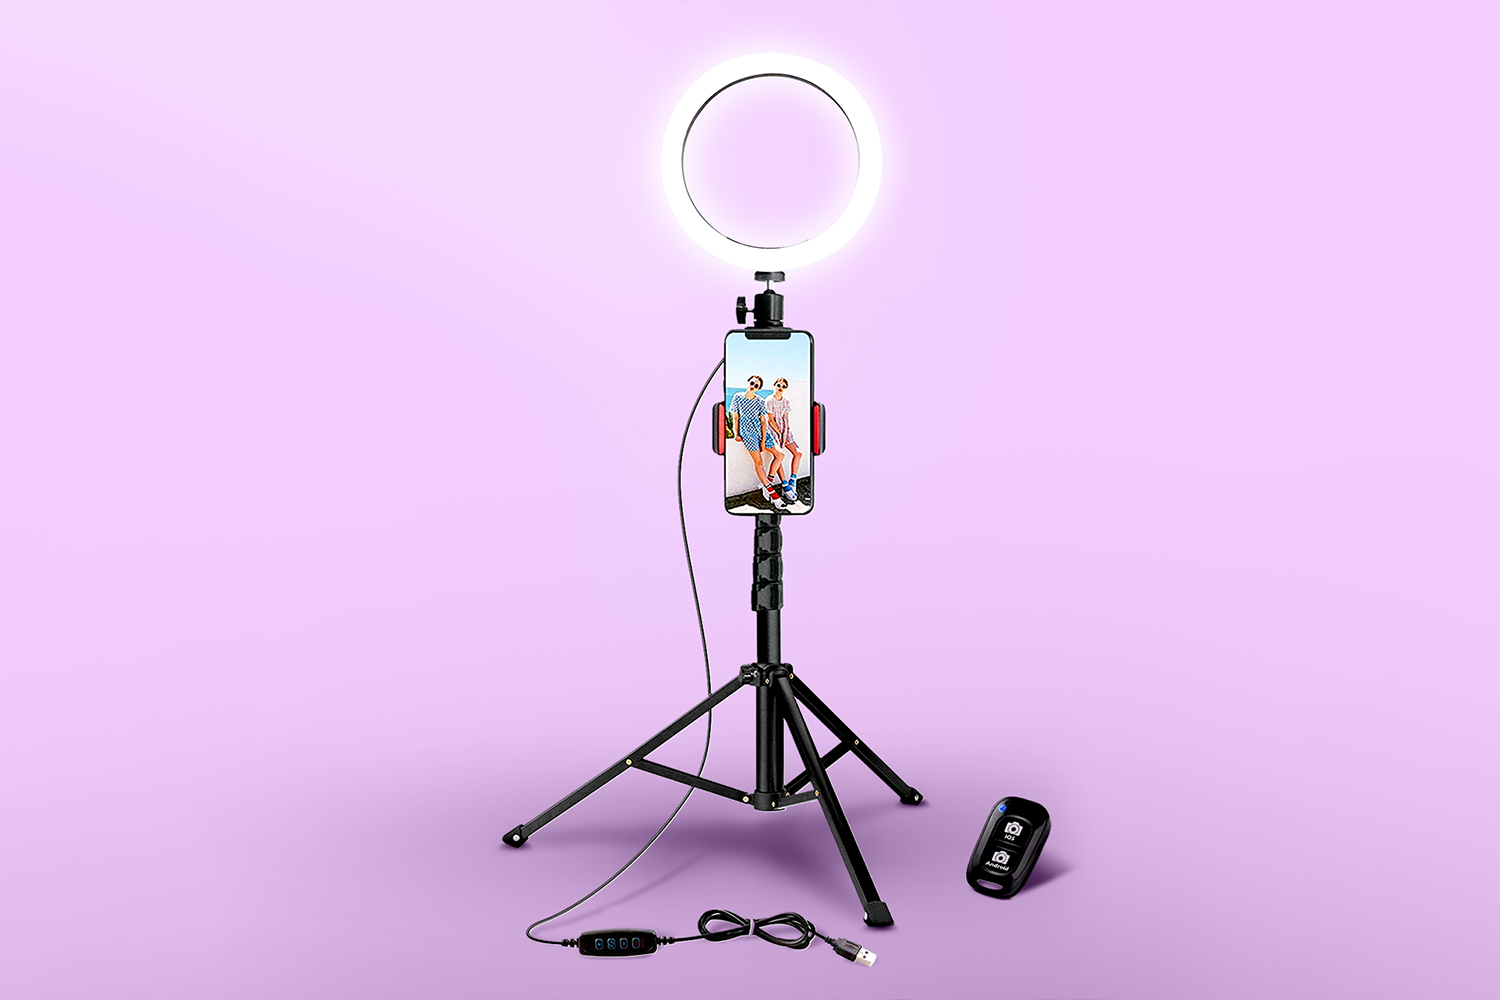 Ring light on top of mobile phone and tripod